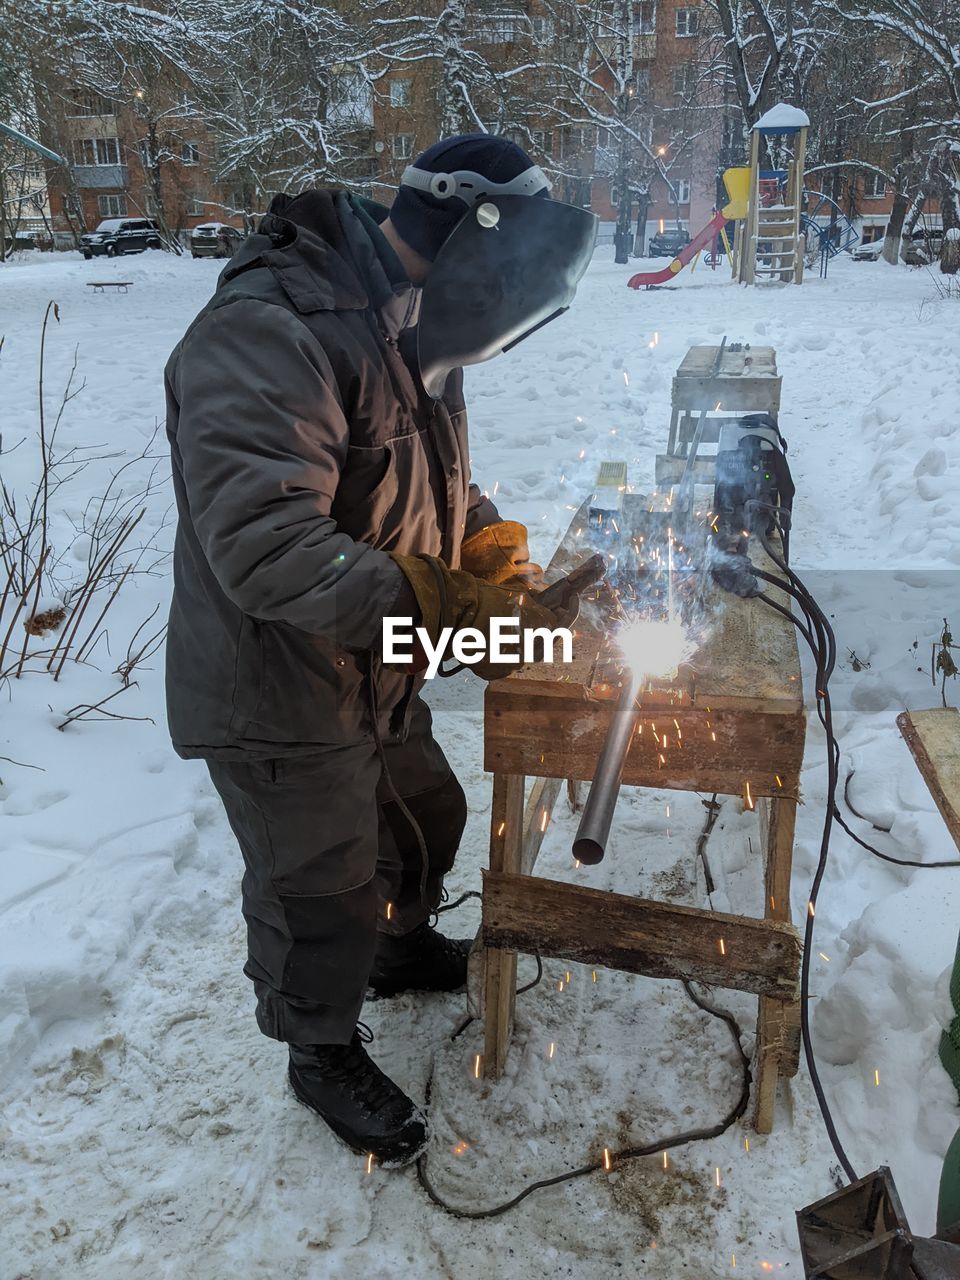 winter, snow, cold temperature, one person, warm clothing, nature, men, adult, freezing, clothing, full length, burning, fire, ice, occupation, tree, protective workwear, protection, flame, blizzard, working, heat, standing, footwear, holding, side view, environment, outdoors, winter storm